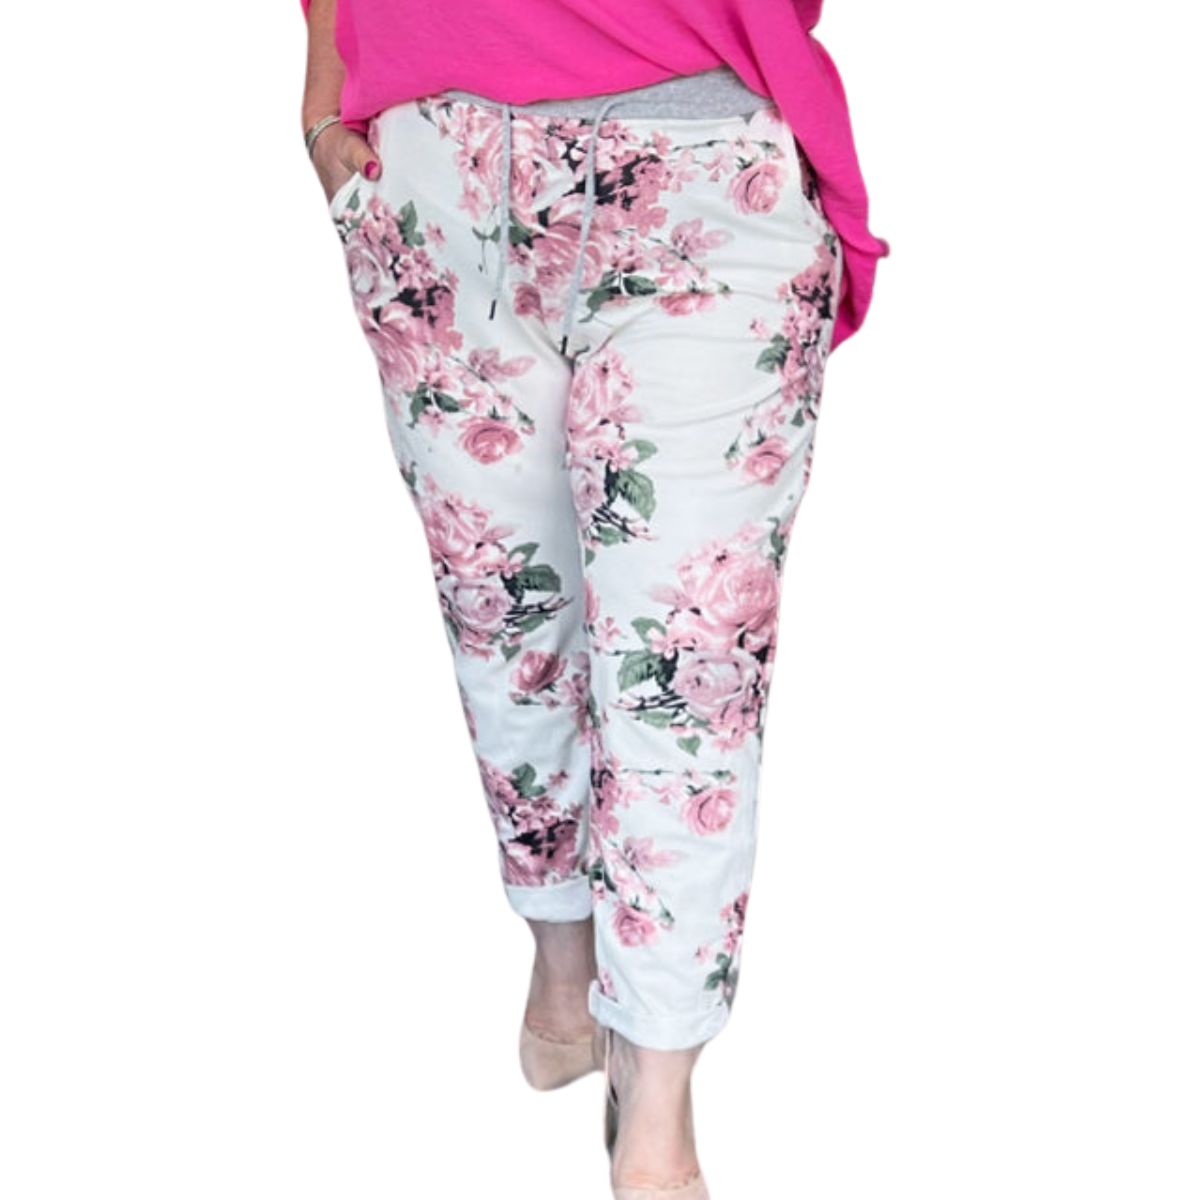 PINK WHITE FLORAL ELASTIC JOGGERS WITH SIDE POCKETS